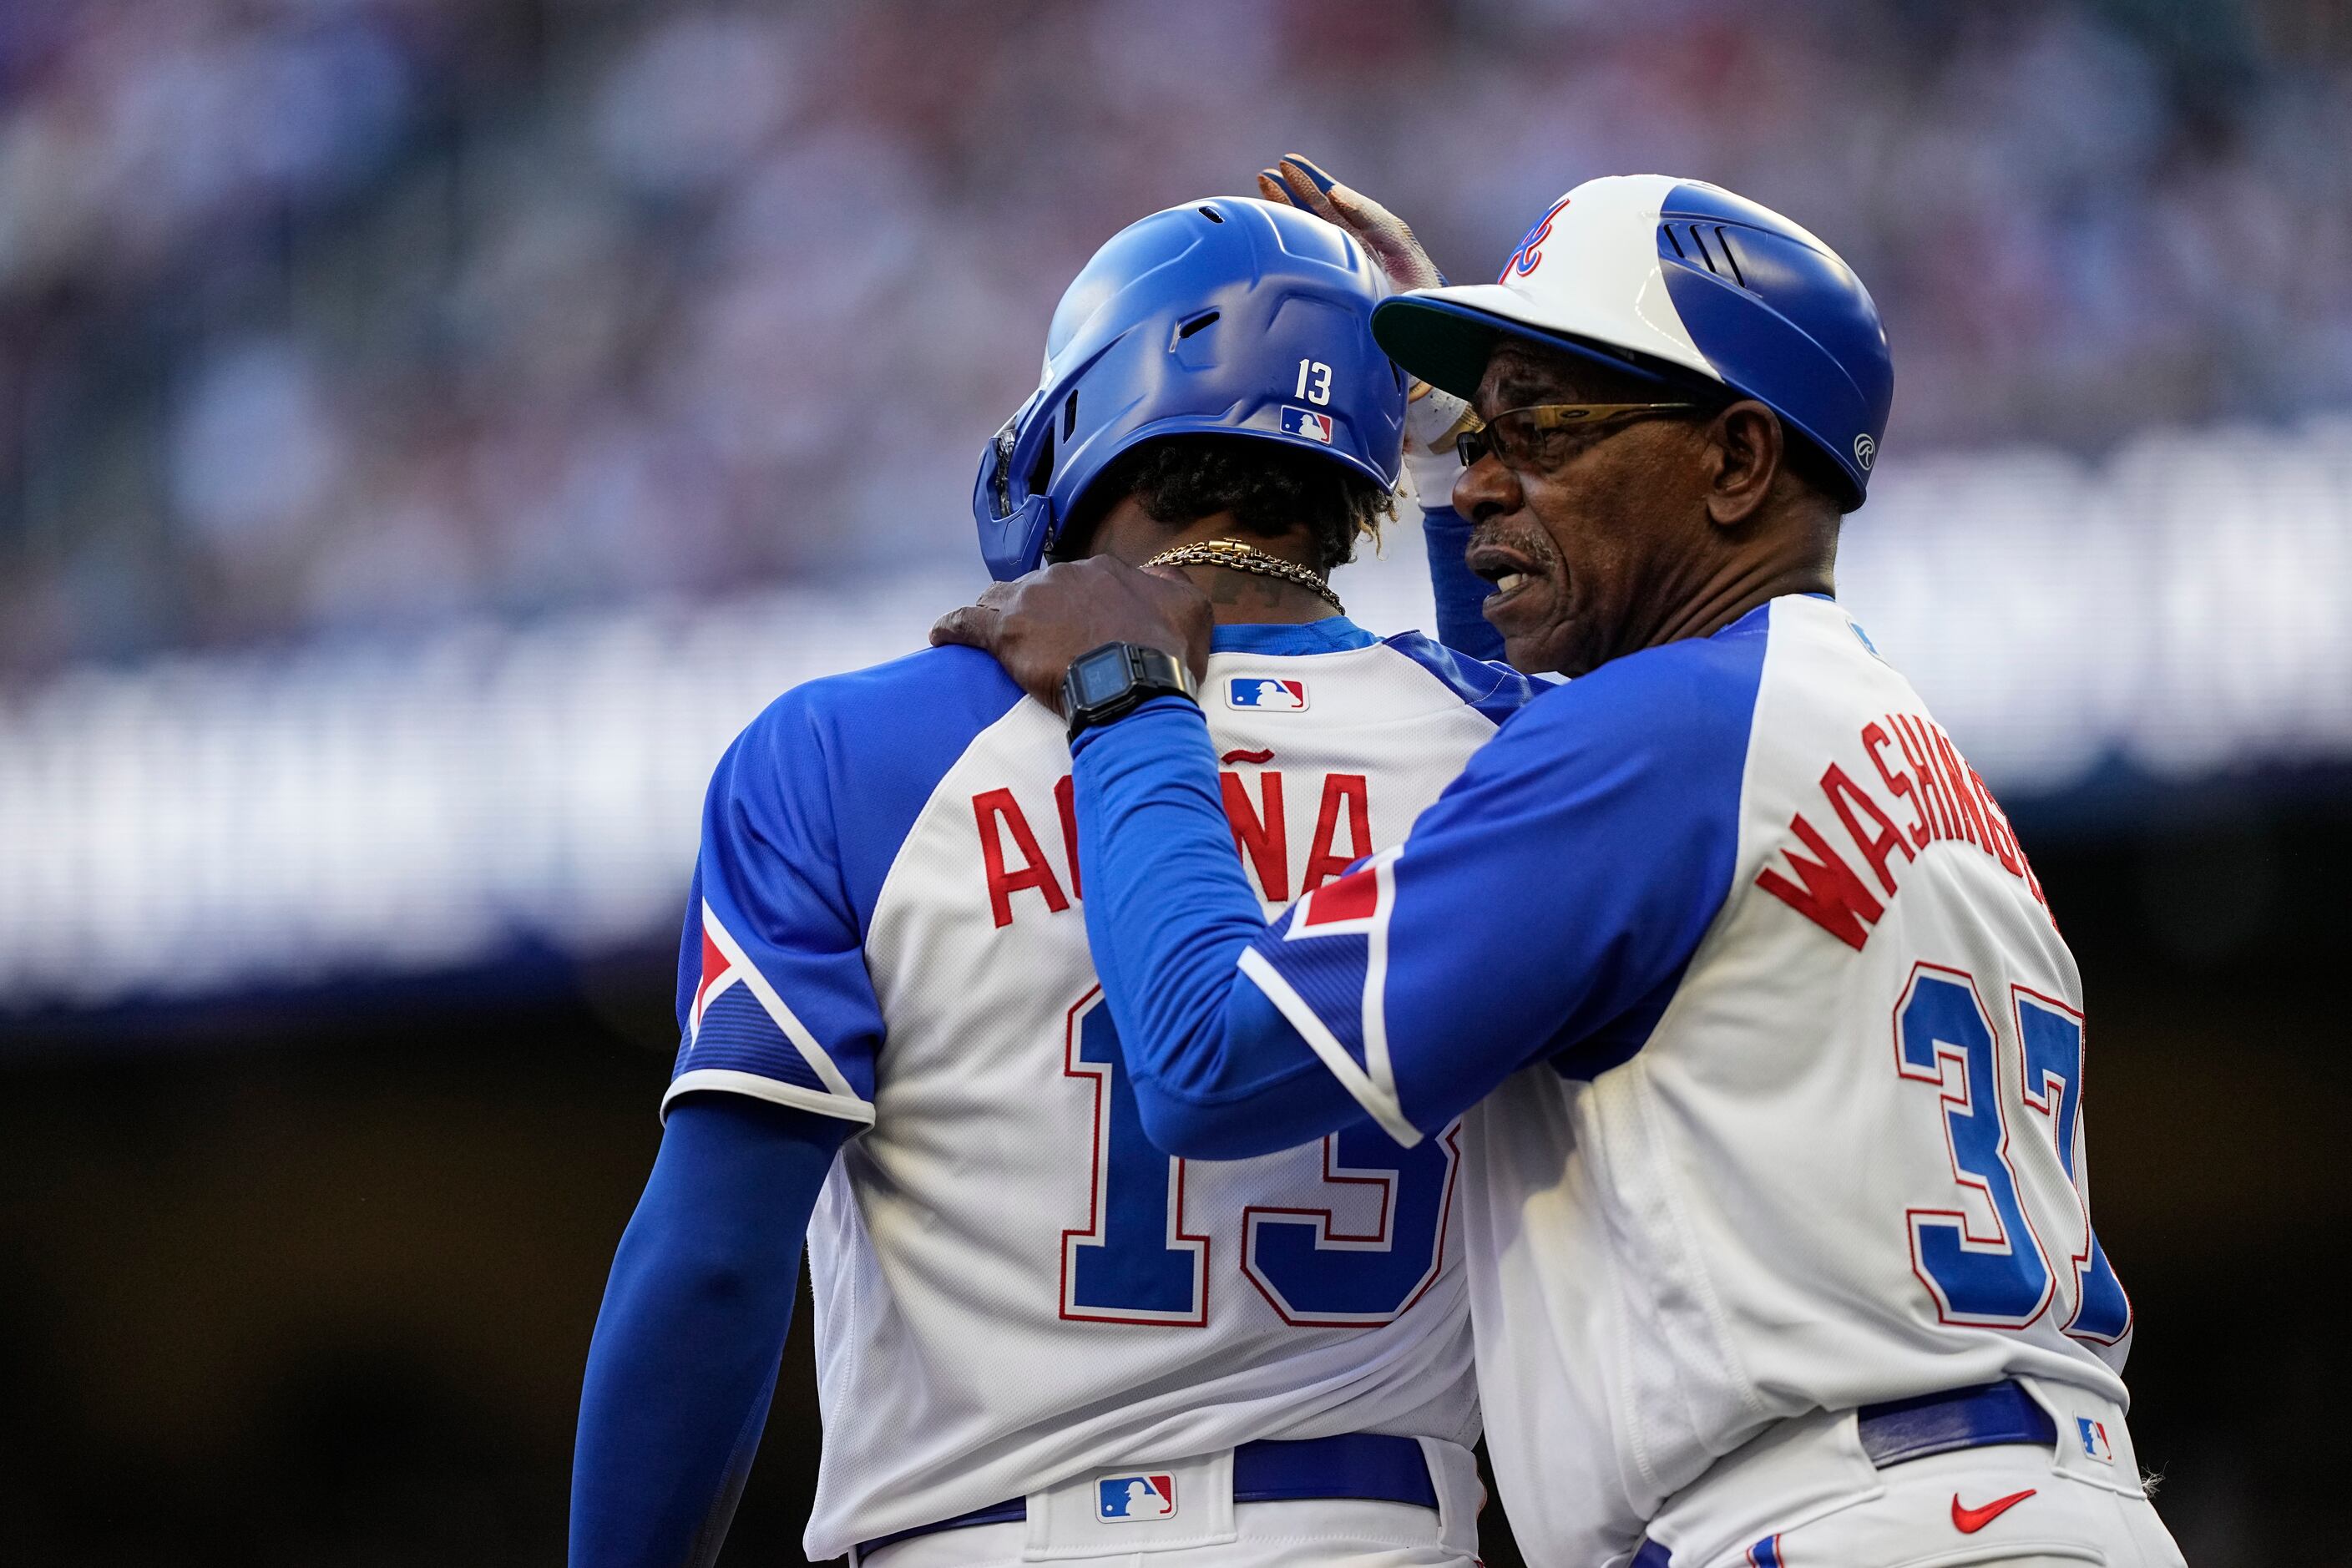 Ron Washington on Rangers' role in 'greatest years' of career